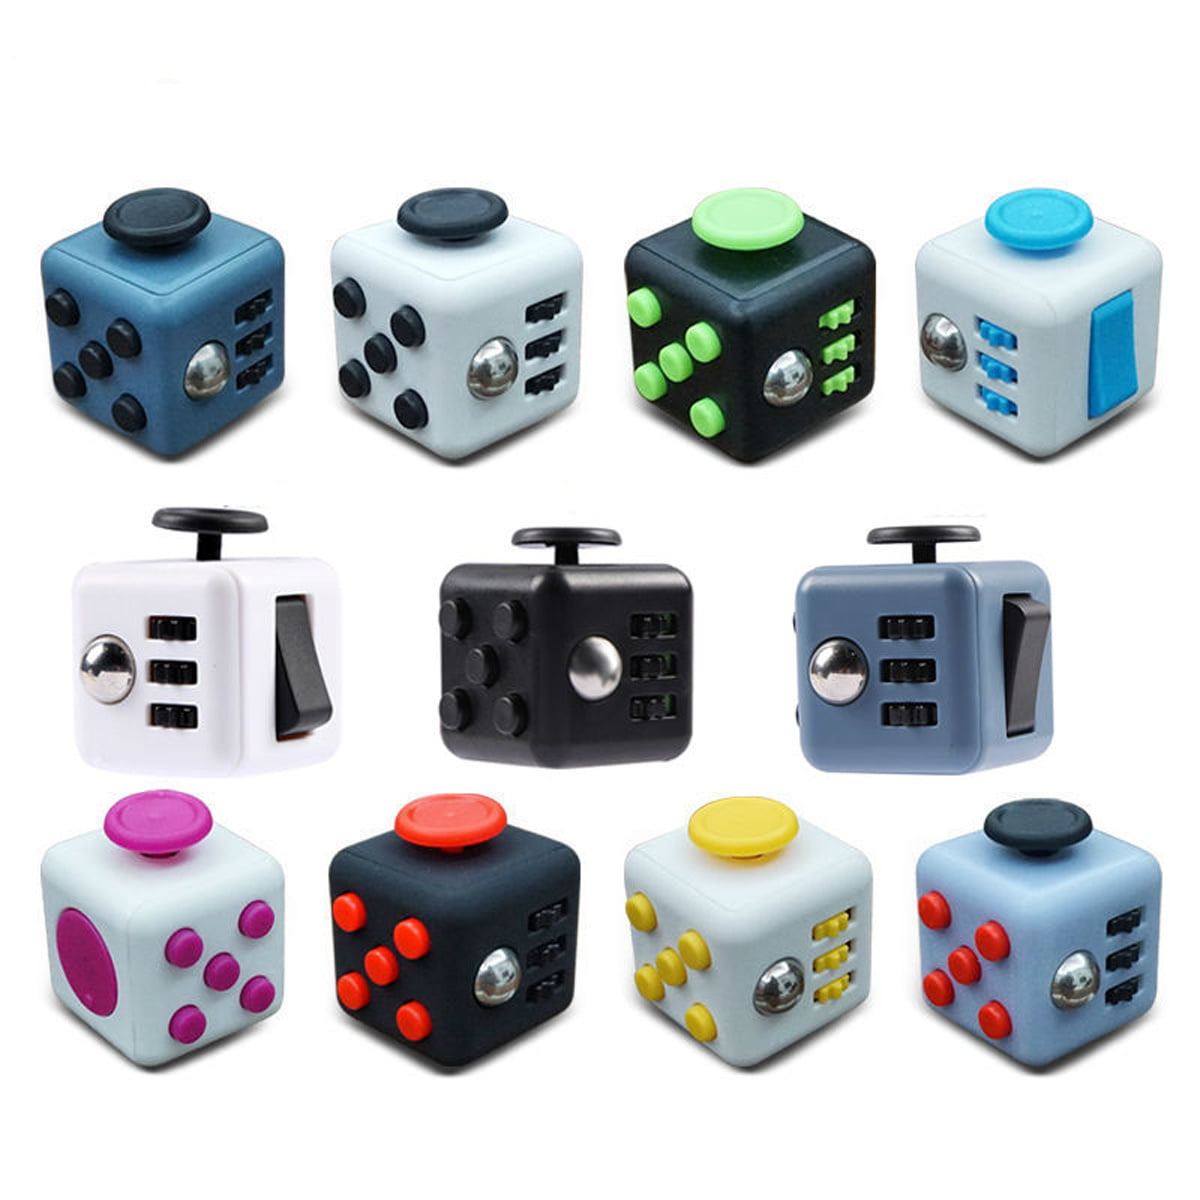 FIDGET CUBE DESK TOY STRESS ANXIETY RELIEF FOCUS PUZZLE ADHD THERPY US Seller 